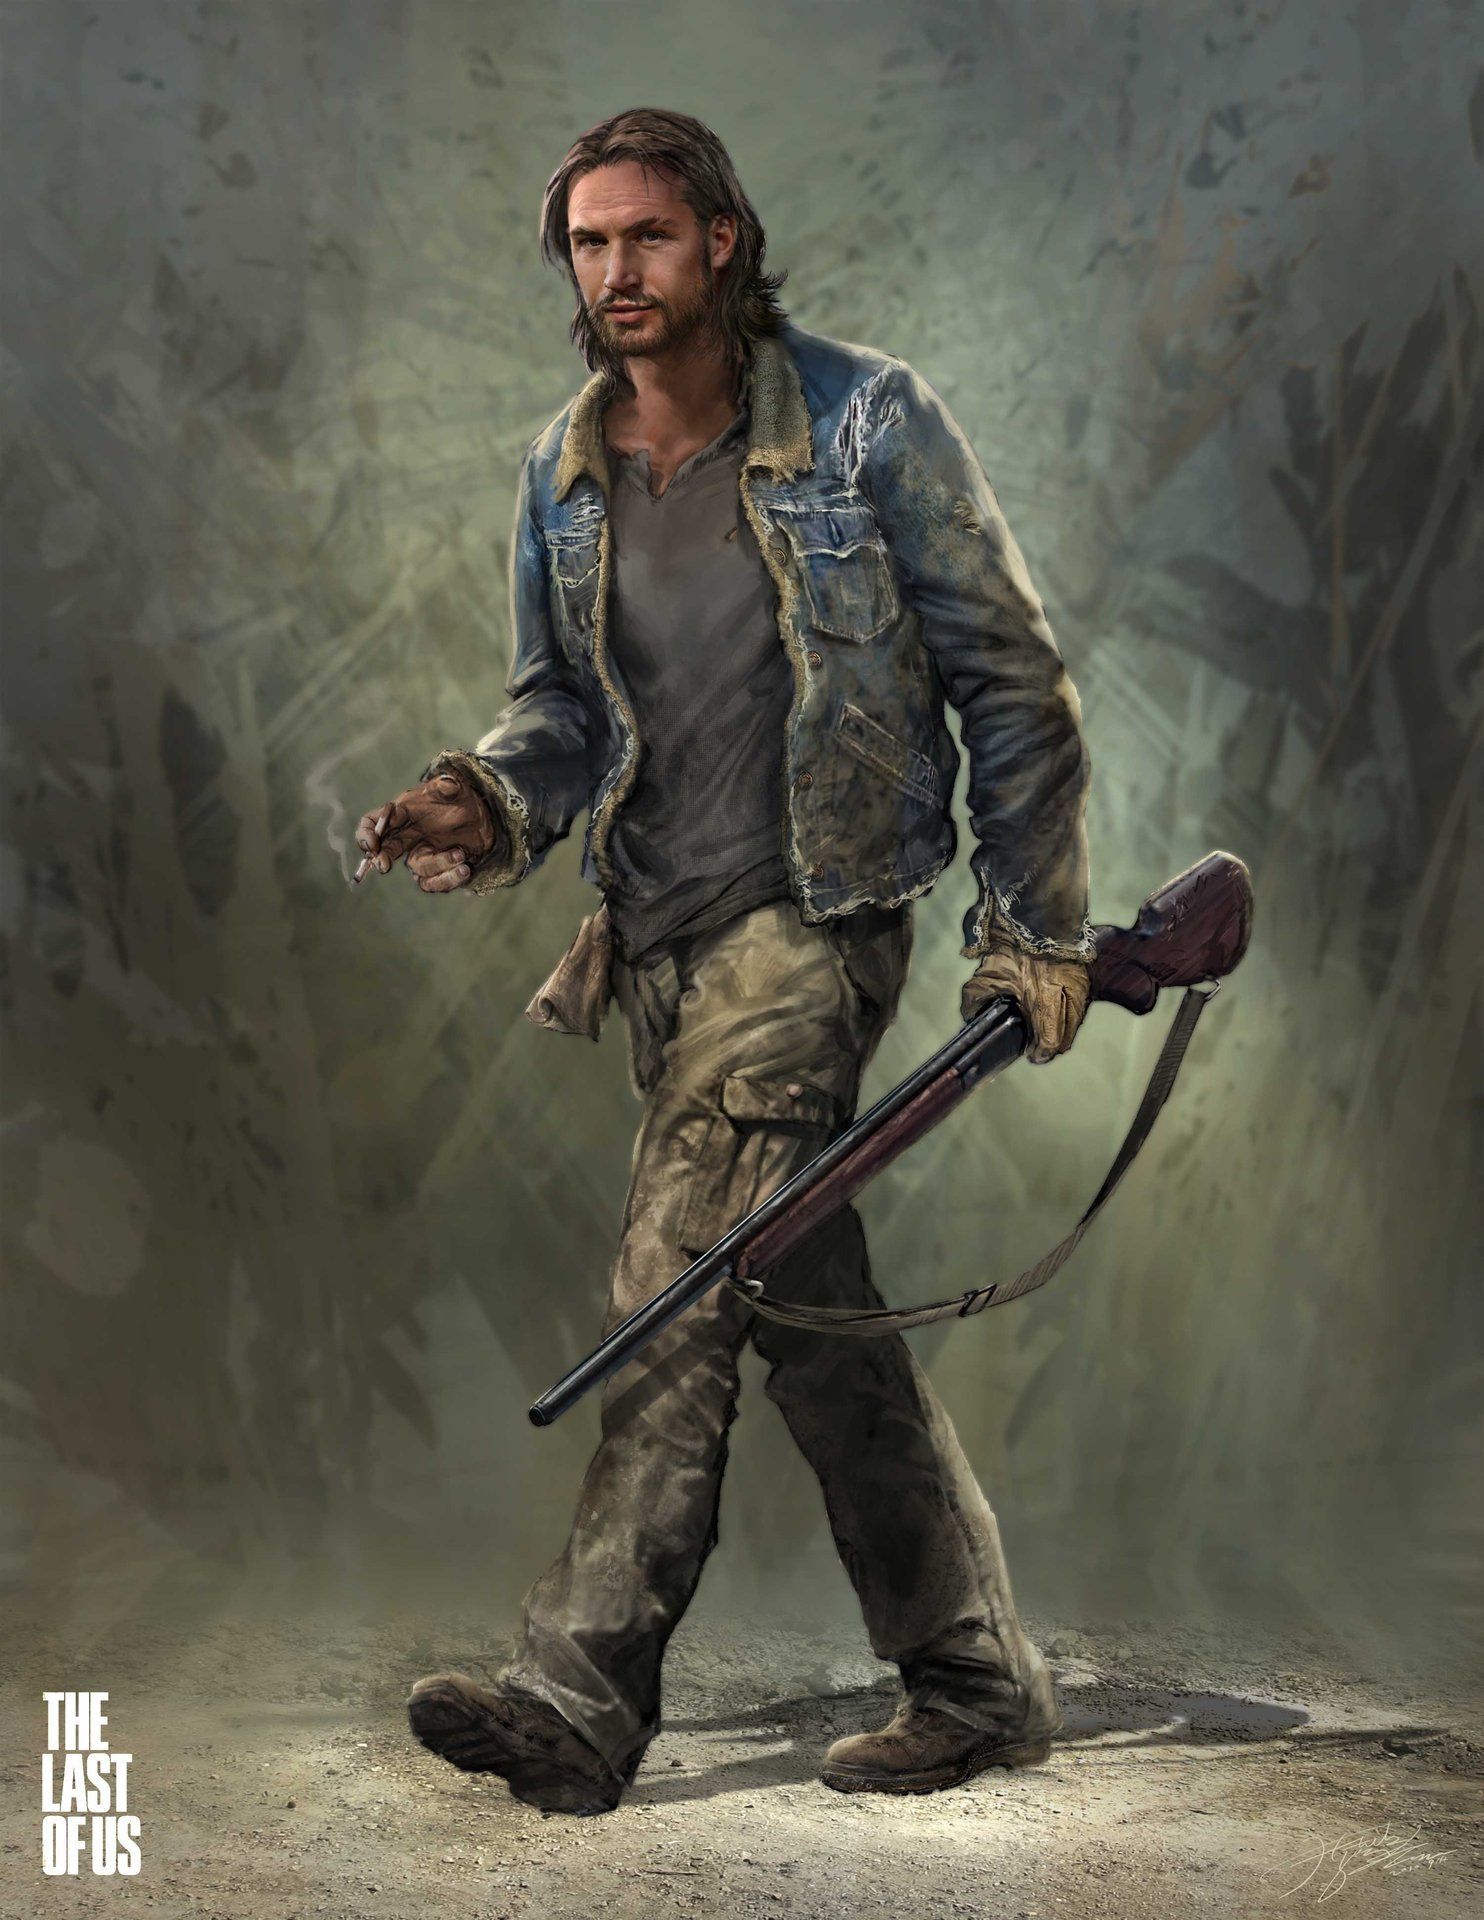 Tommy, The Last of Us, Hyoung Nam. Apocalypse character